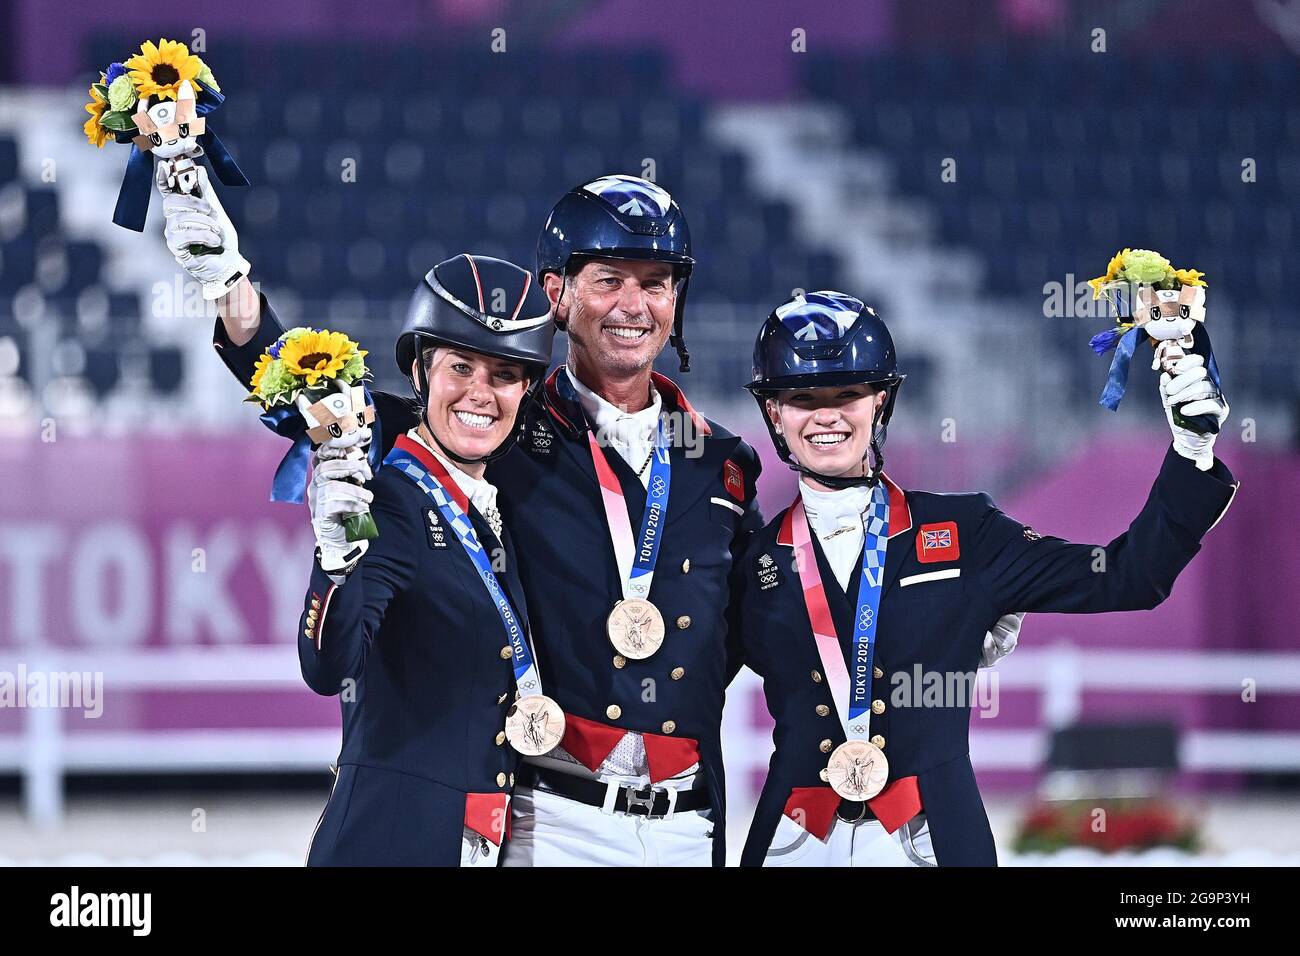 Tokyo, Japan. 27th July, 2021. Dressage Team. Grand Prix Special. Team Final. Equestrian Park. 1-1. 2Chome. Kamiyoga. Setagaya. Tokyo. Bronze medalists. (l to r) Charlotte Dujardin, Carl Hester and Charlotte Fry (GBR). Credit Garry Bowden/Sport in Pictures/Alamy live news Credit: Sport In Pictures/Alamy Live News Stock Photo